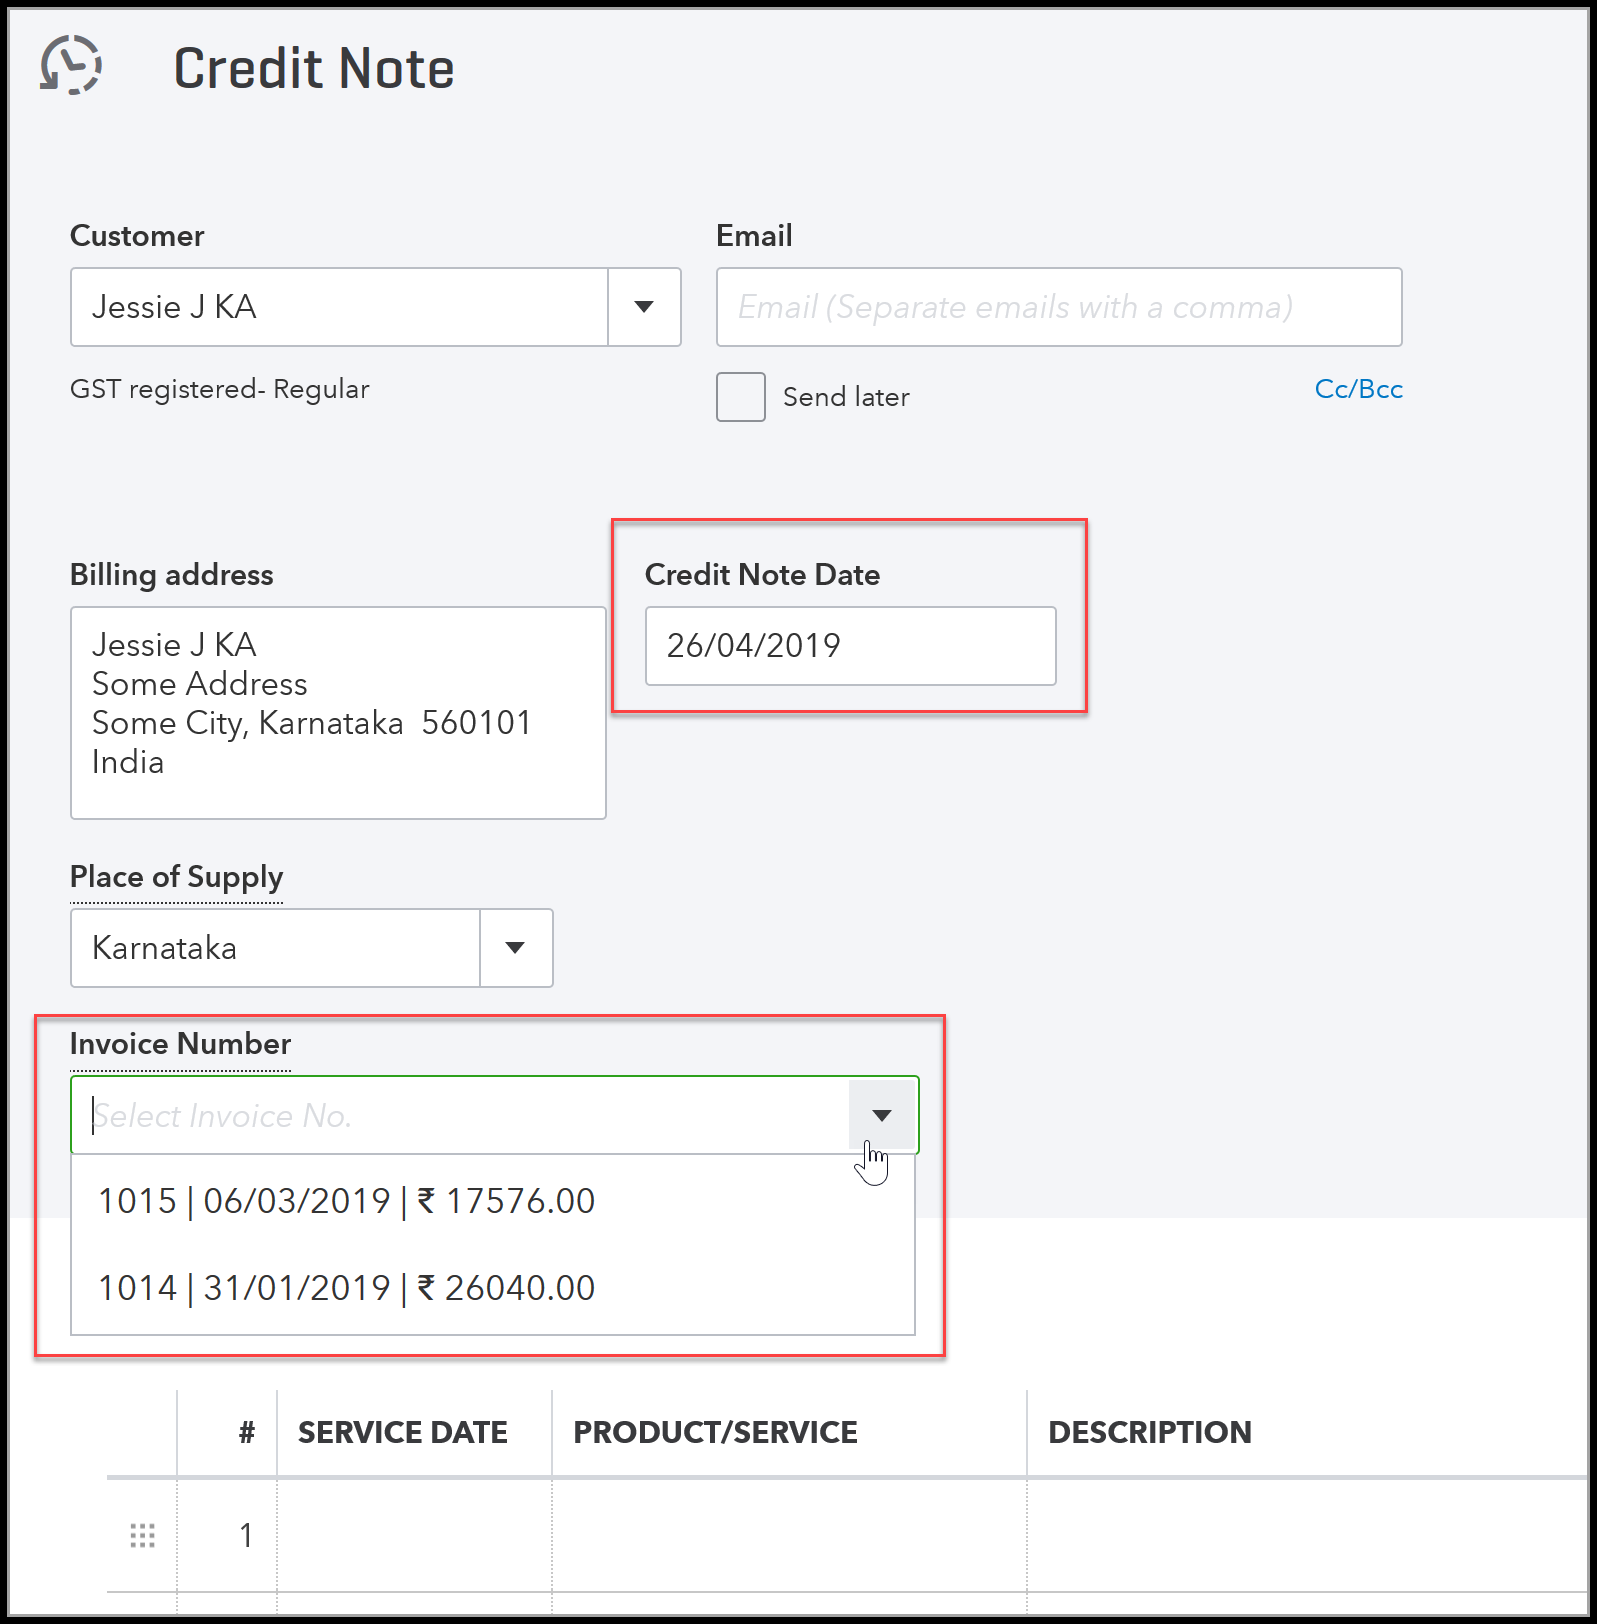 Credit Notes And Source Invoices In GSTR-1 - QuickBooks ...